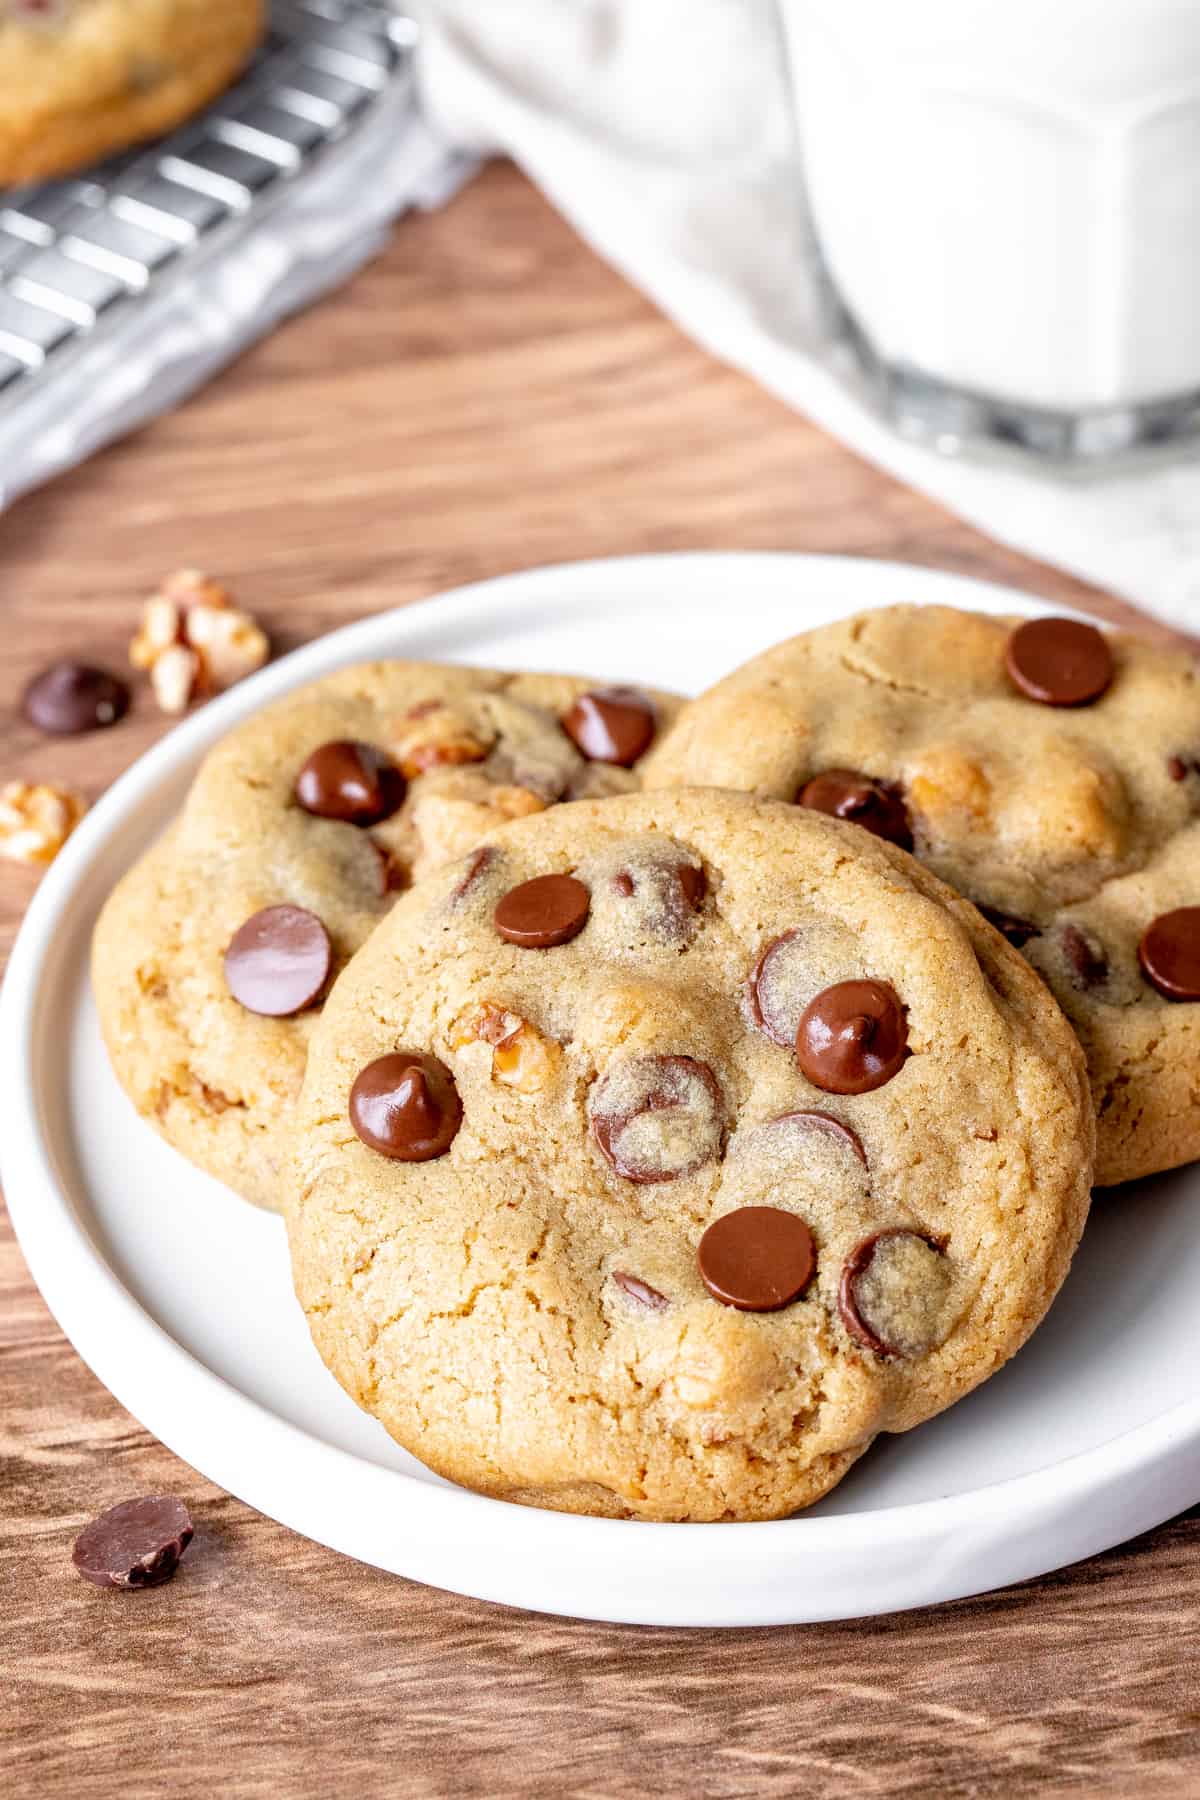 Plate of 3 chocolate chip cookies with walnuts